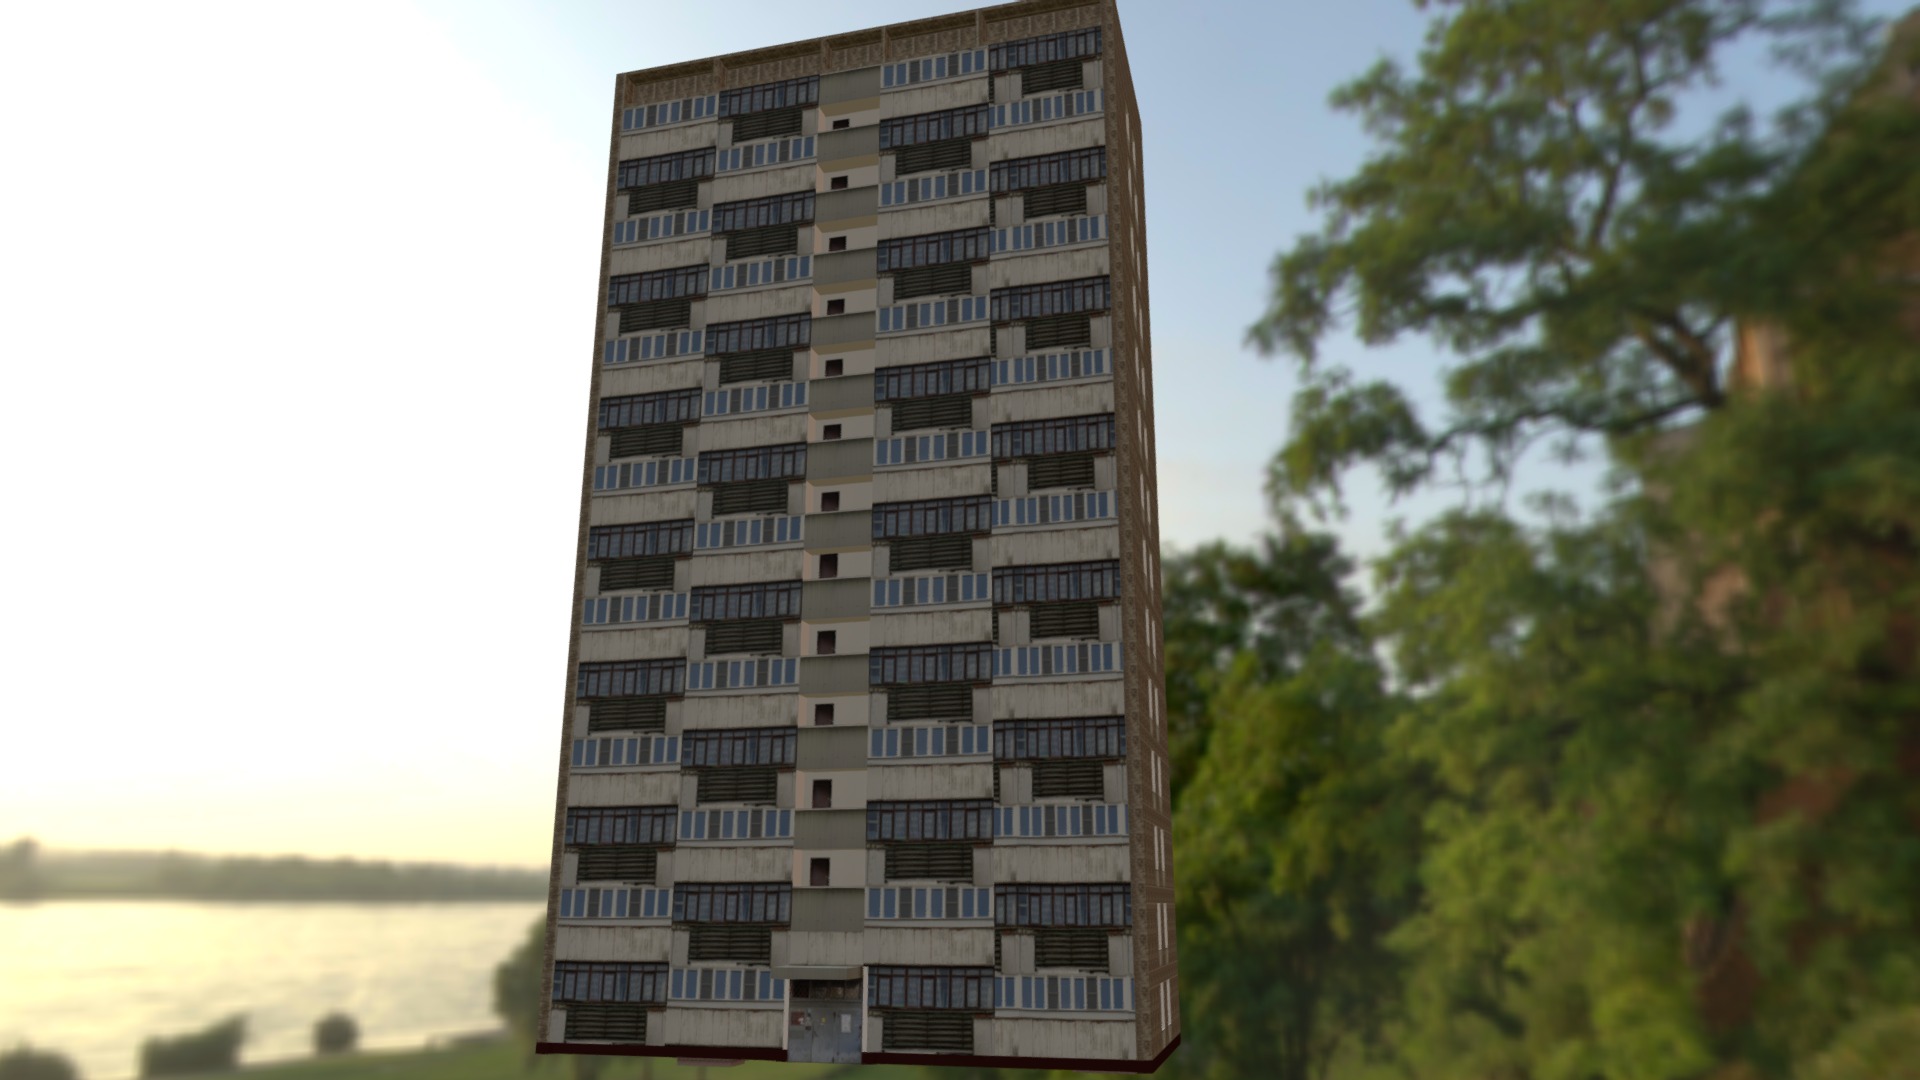 3D model House16k1 - This is a 3D model of the House16k1. The 3D model is about a tall building with many windows.